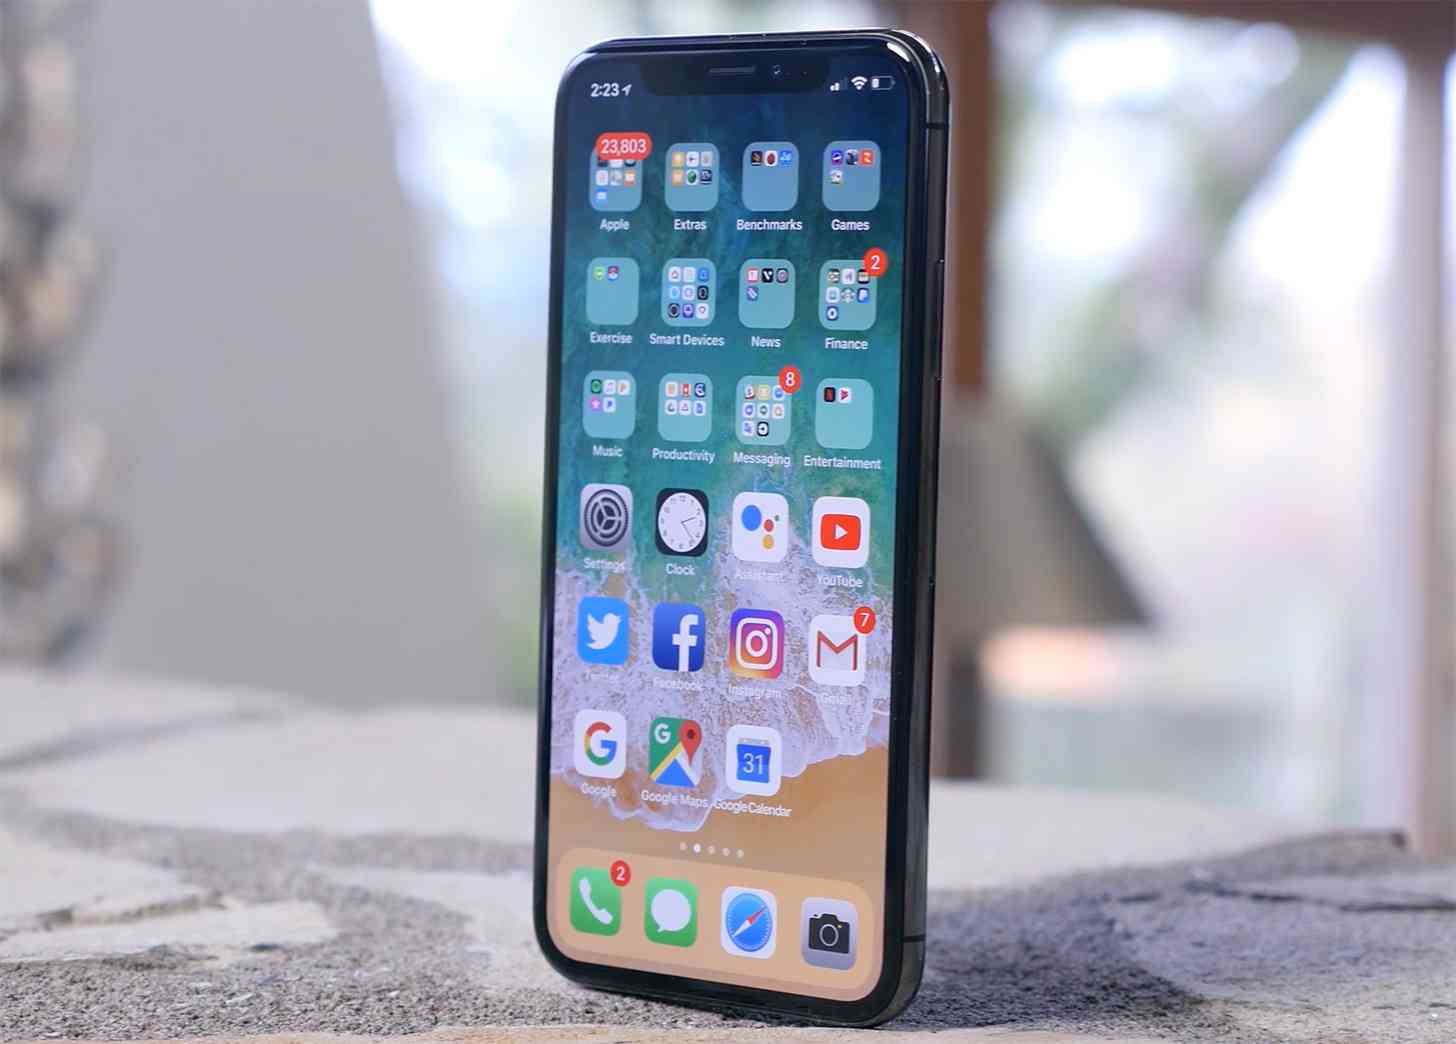 iPhone X hands-on video angle